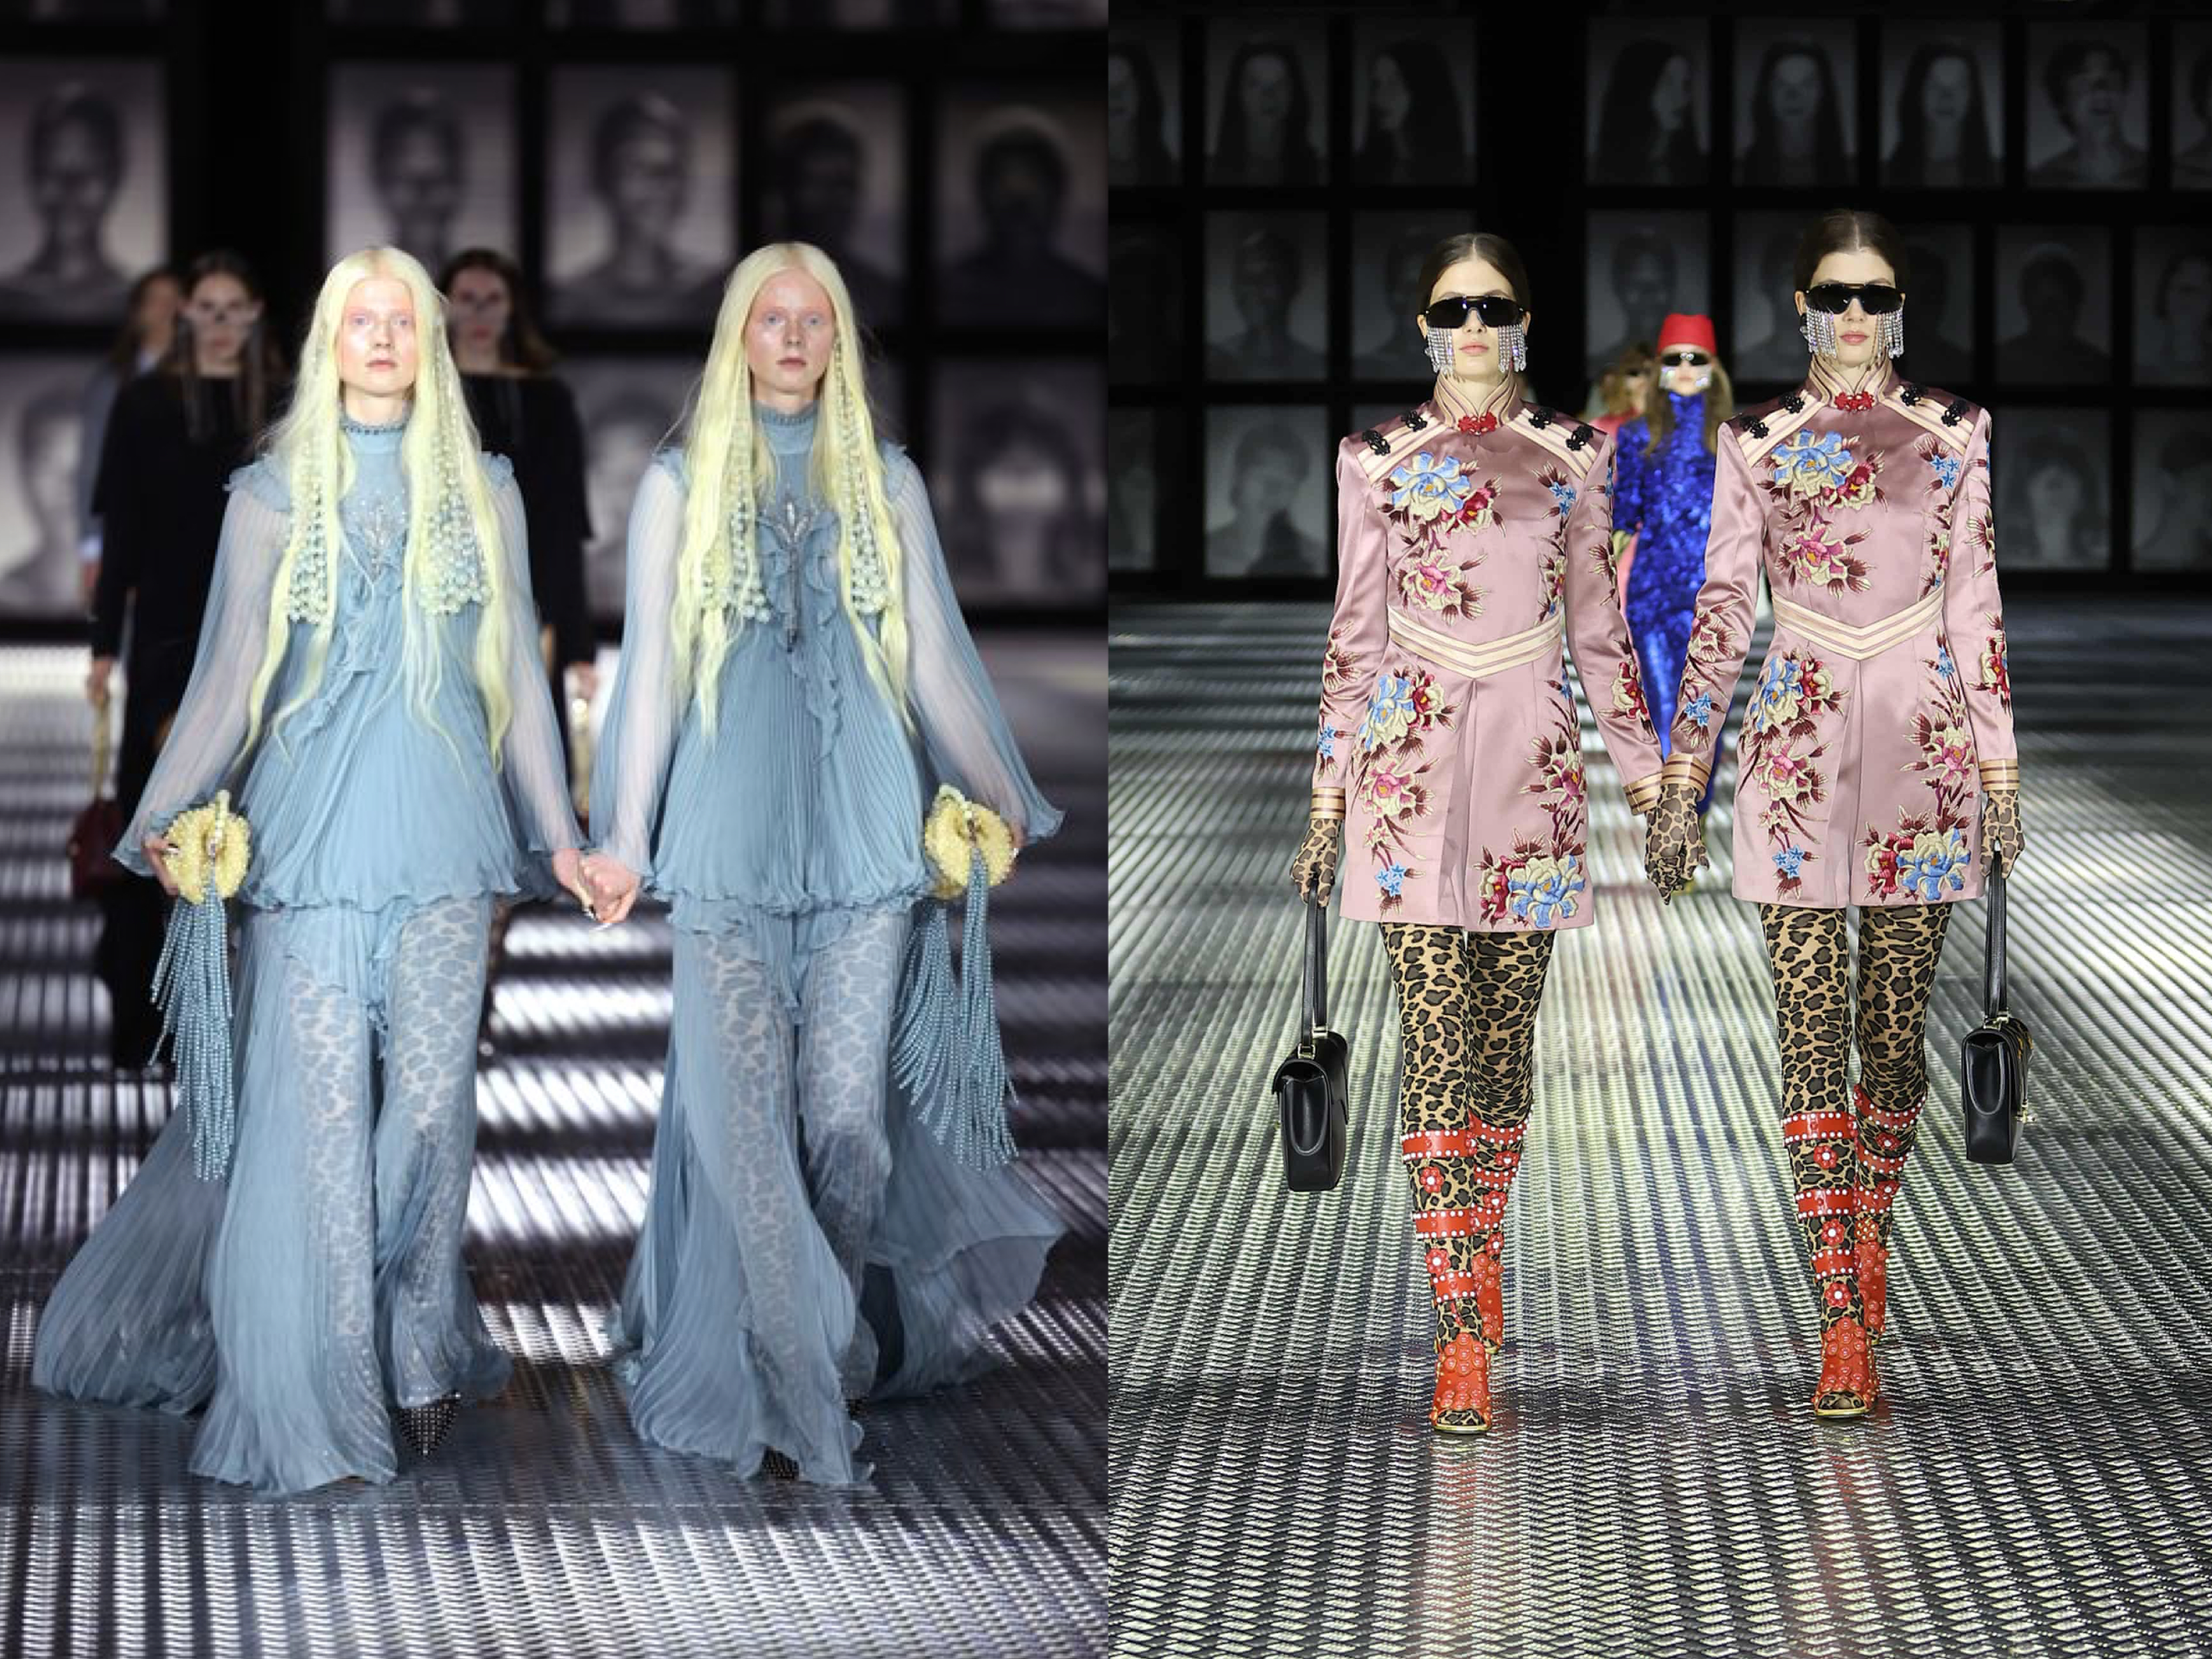 Gucci's Twinsburg Show at Milan Fashion Week Featured Gremlins and